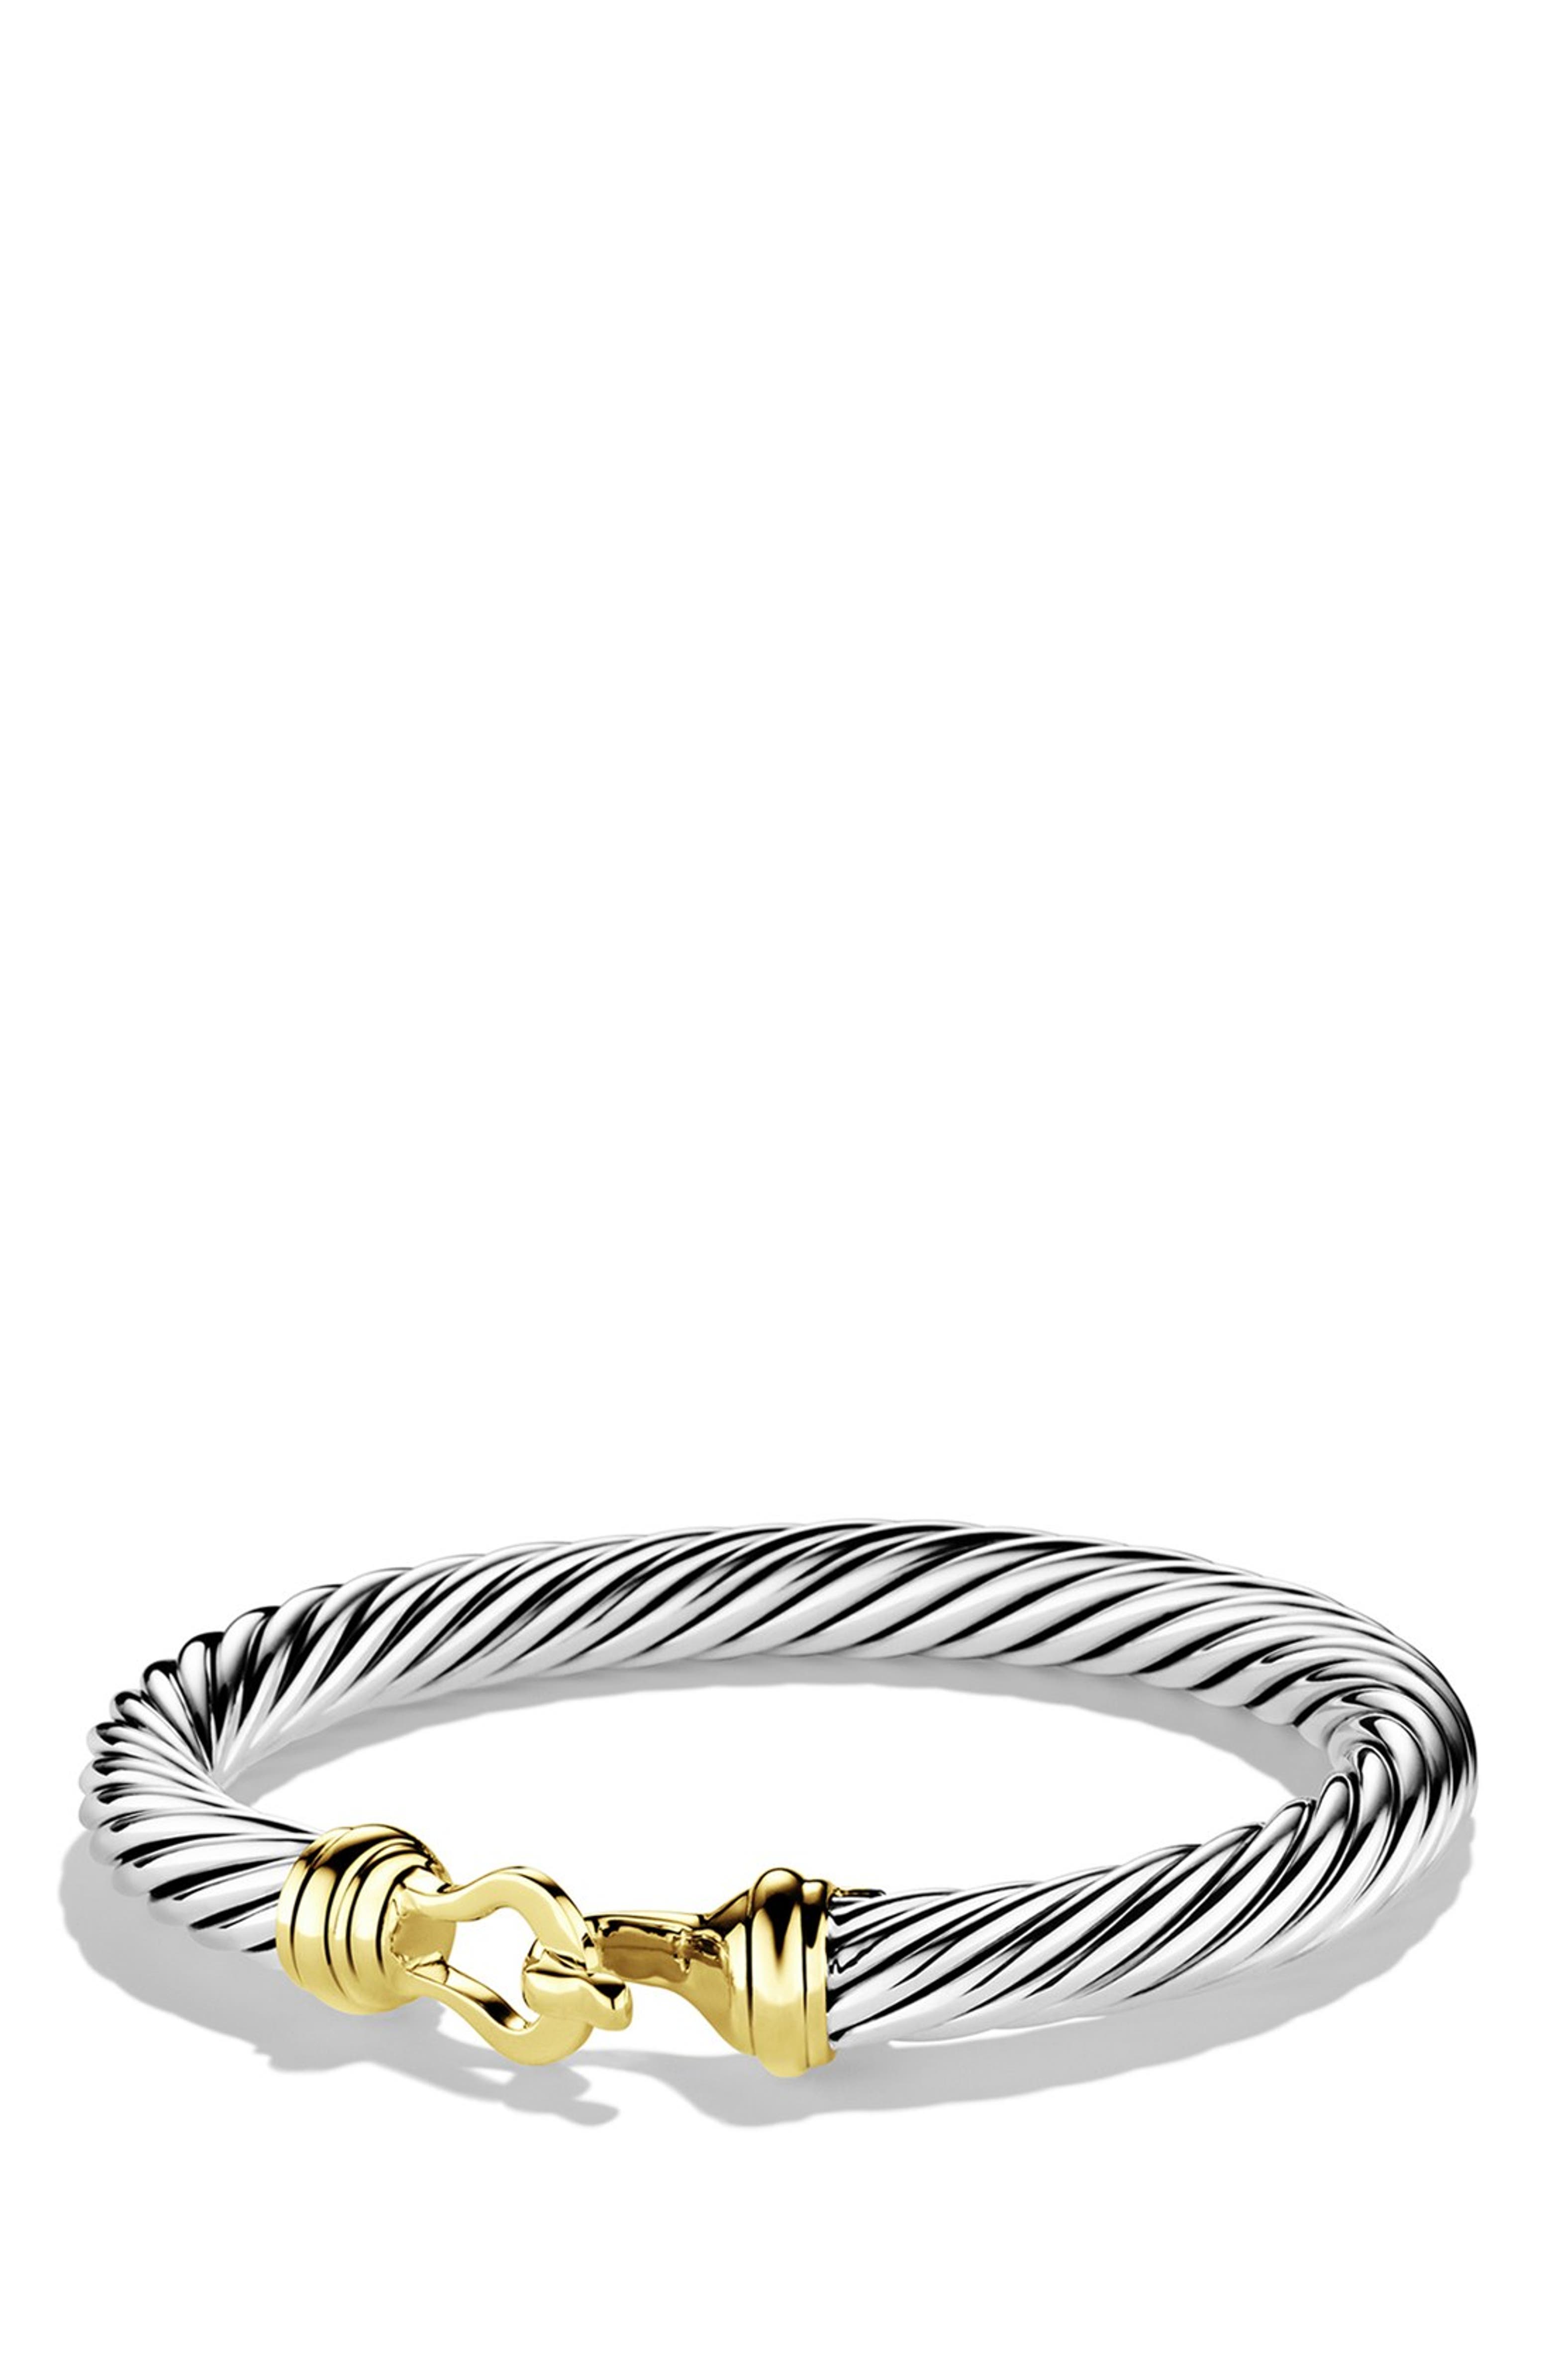 David Yurman 'Cable Buckle' Bracelet with Gold | Nordstrom